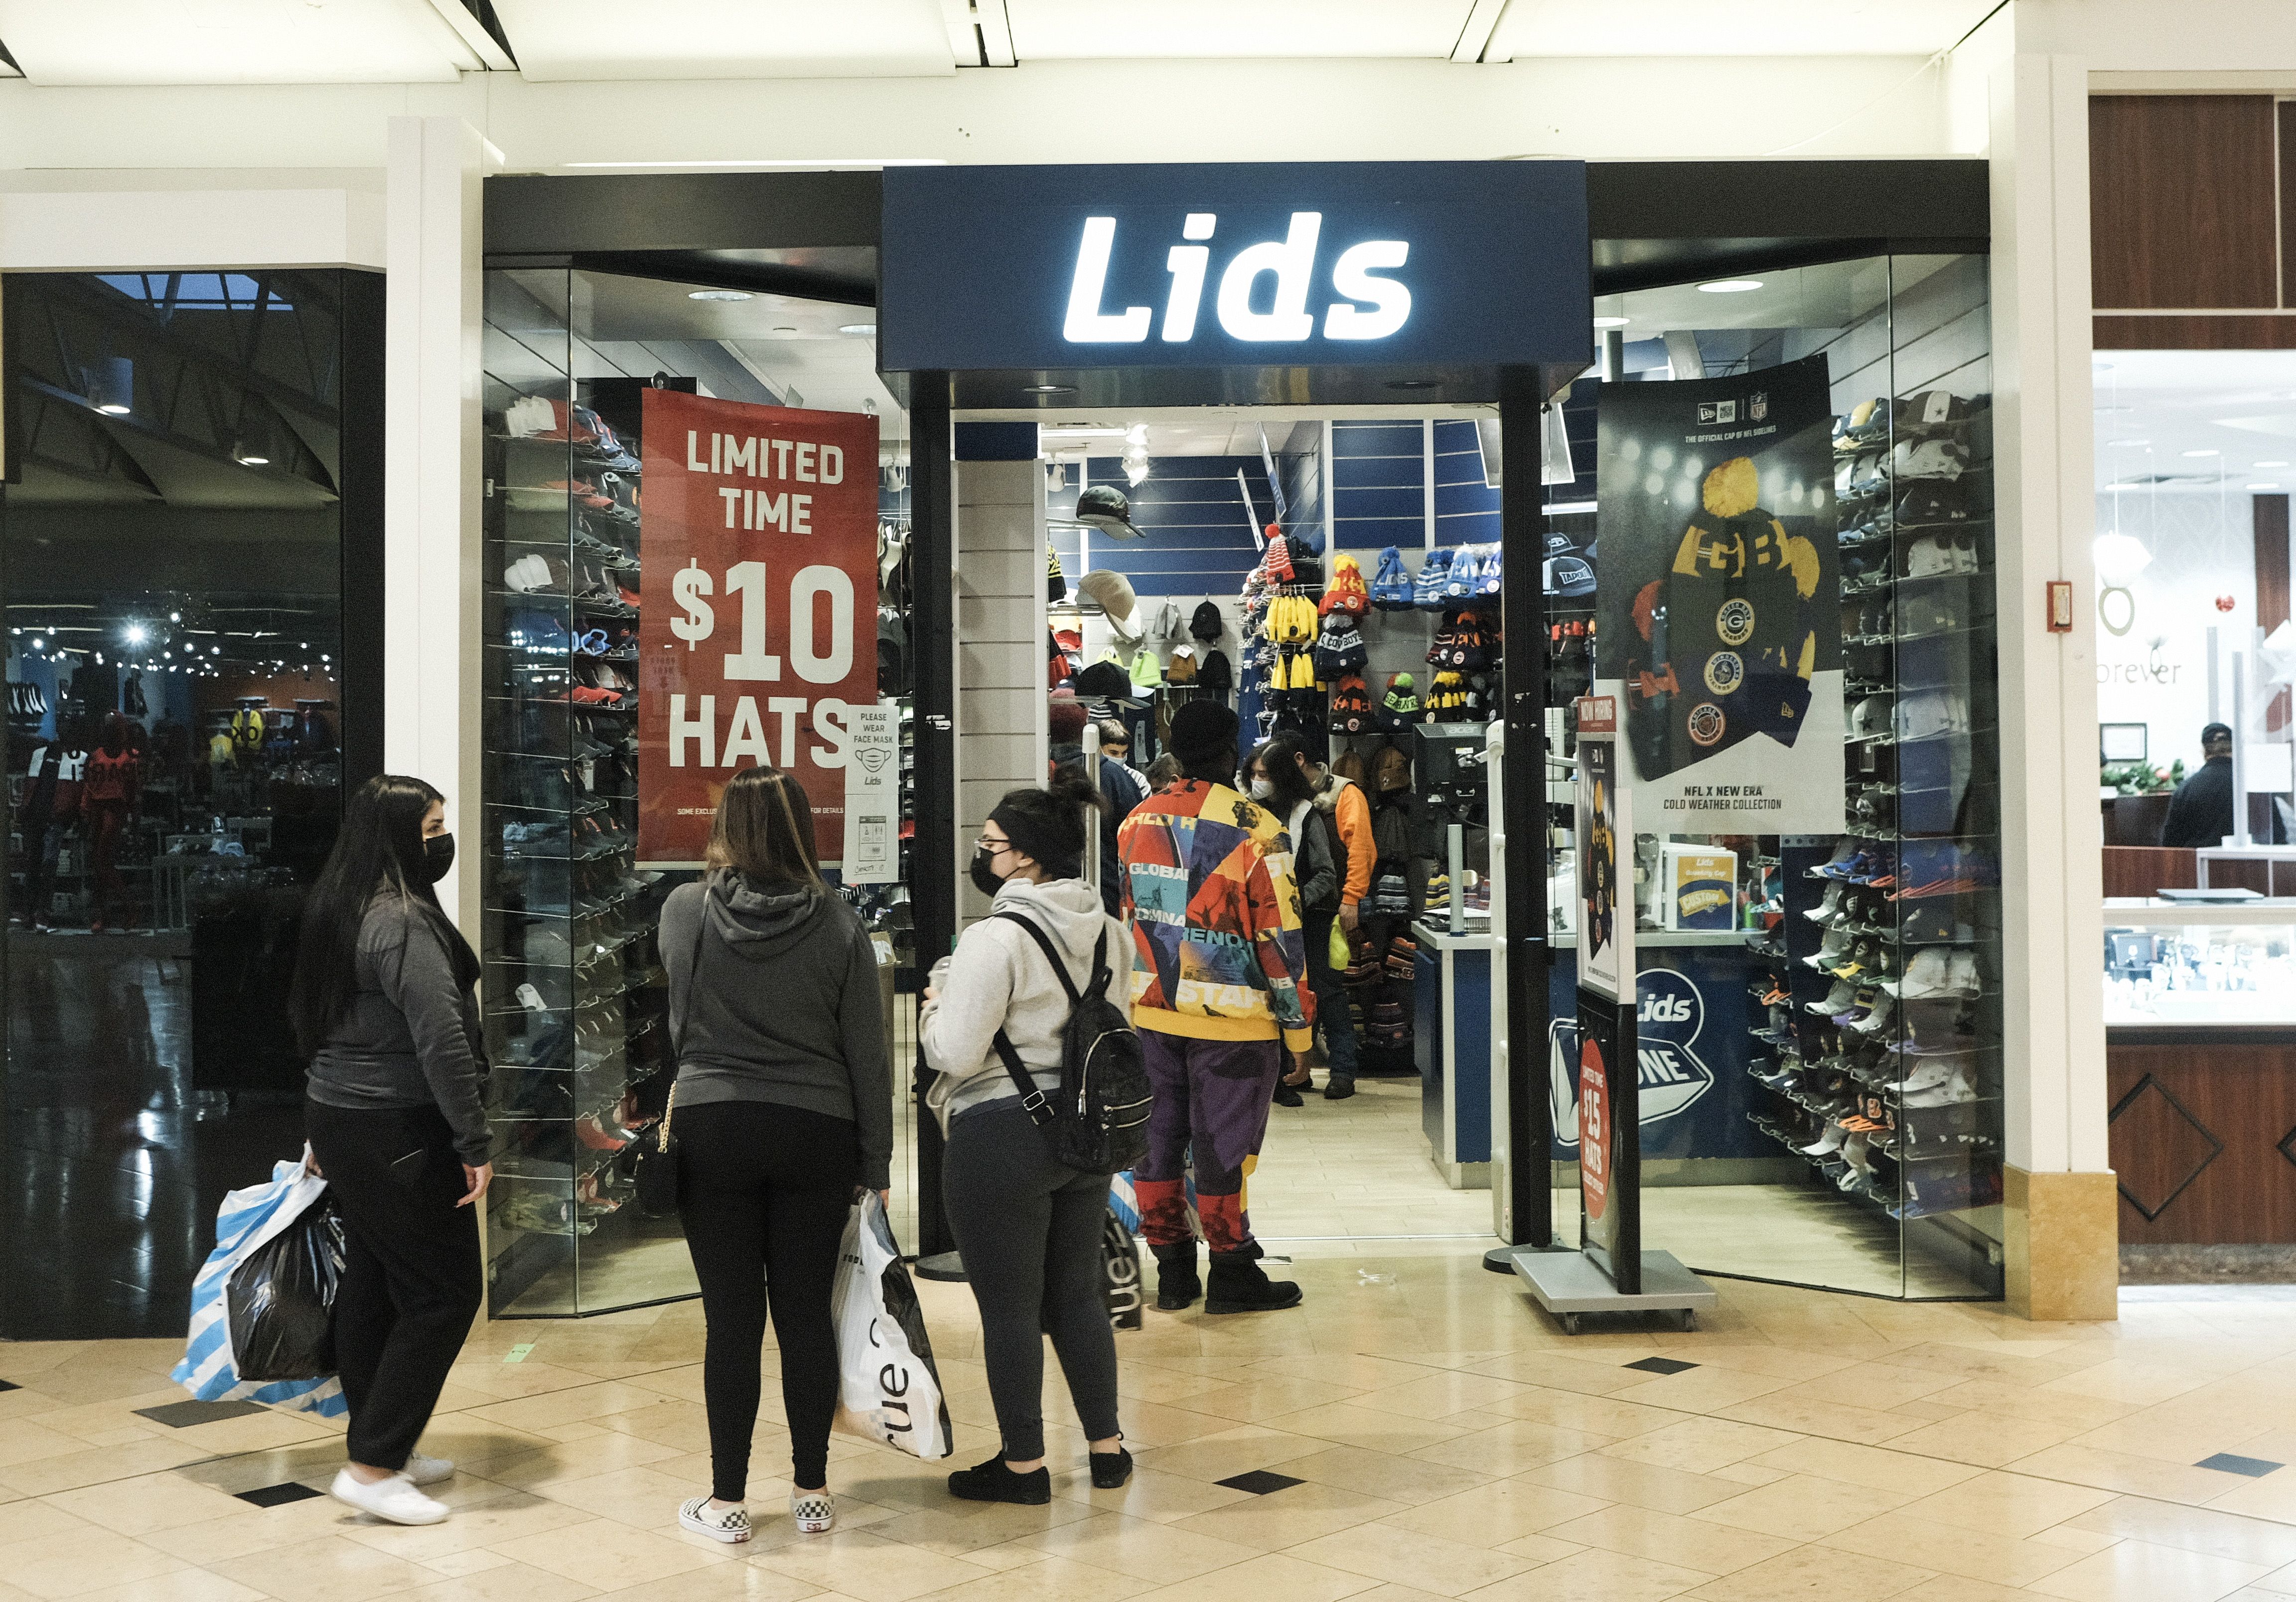 A line of people wait outside a store called "Lids"